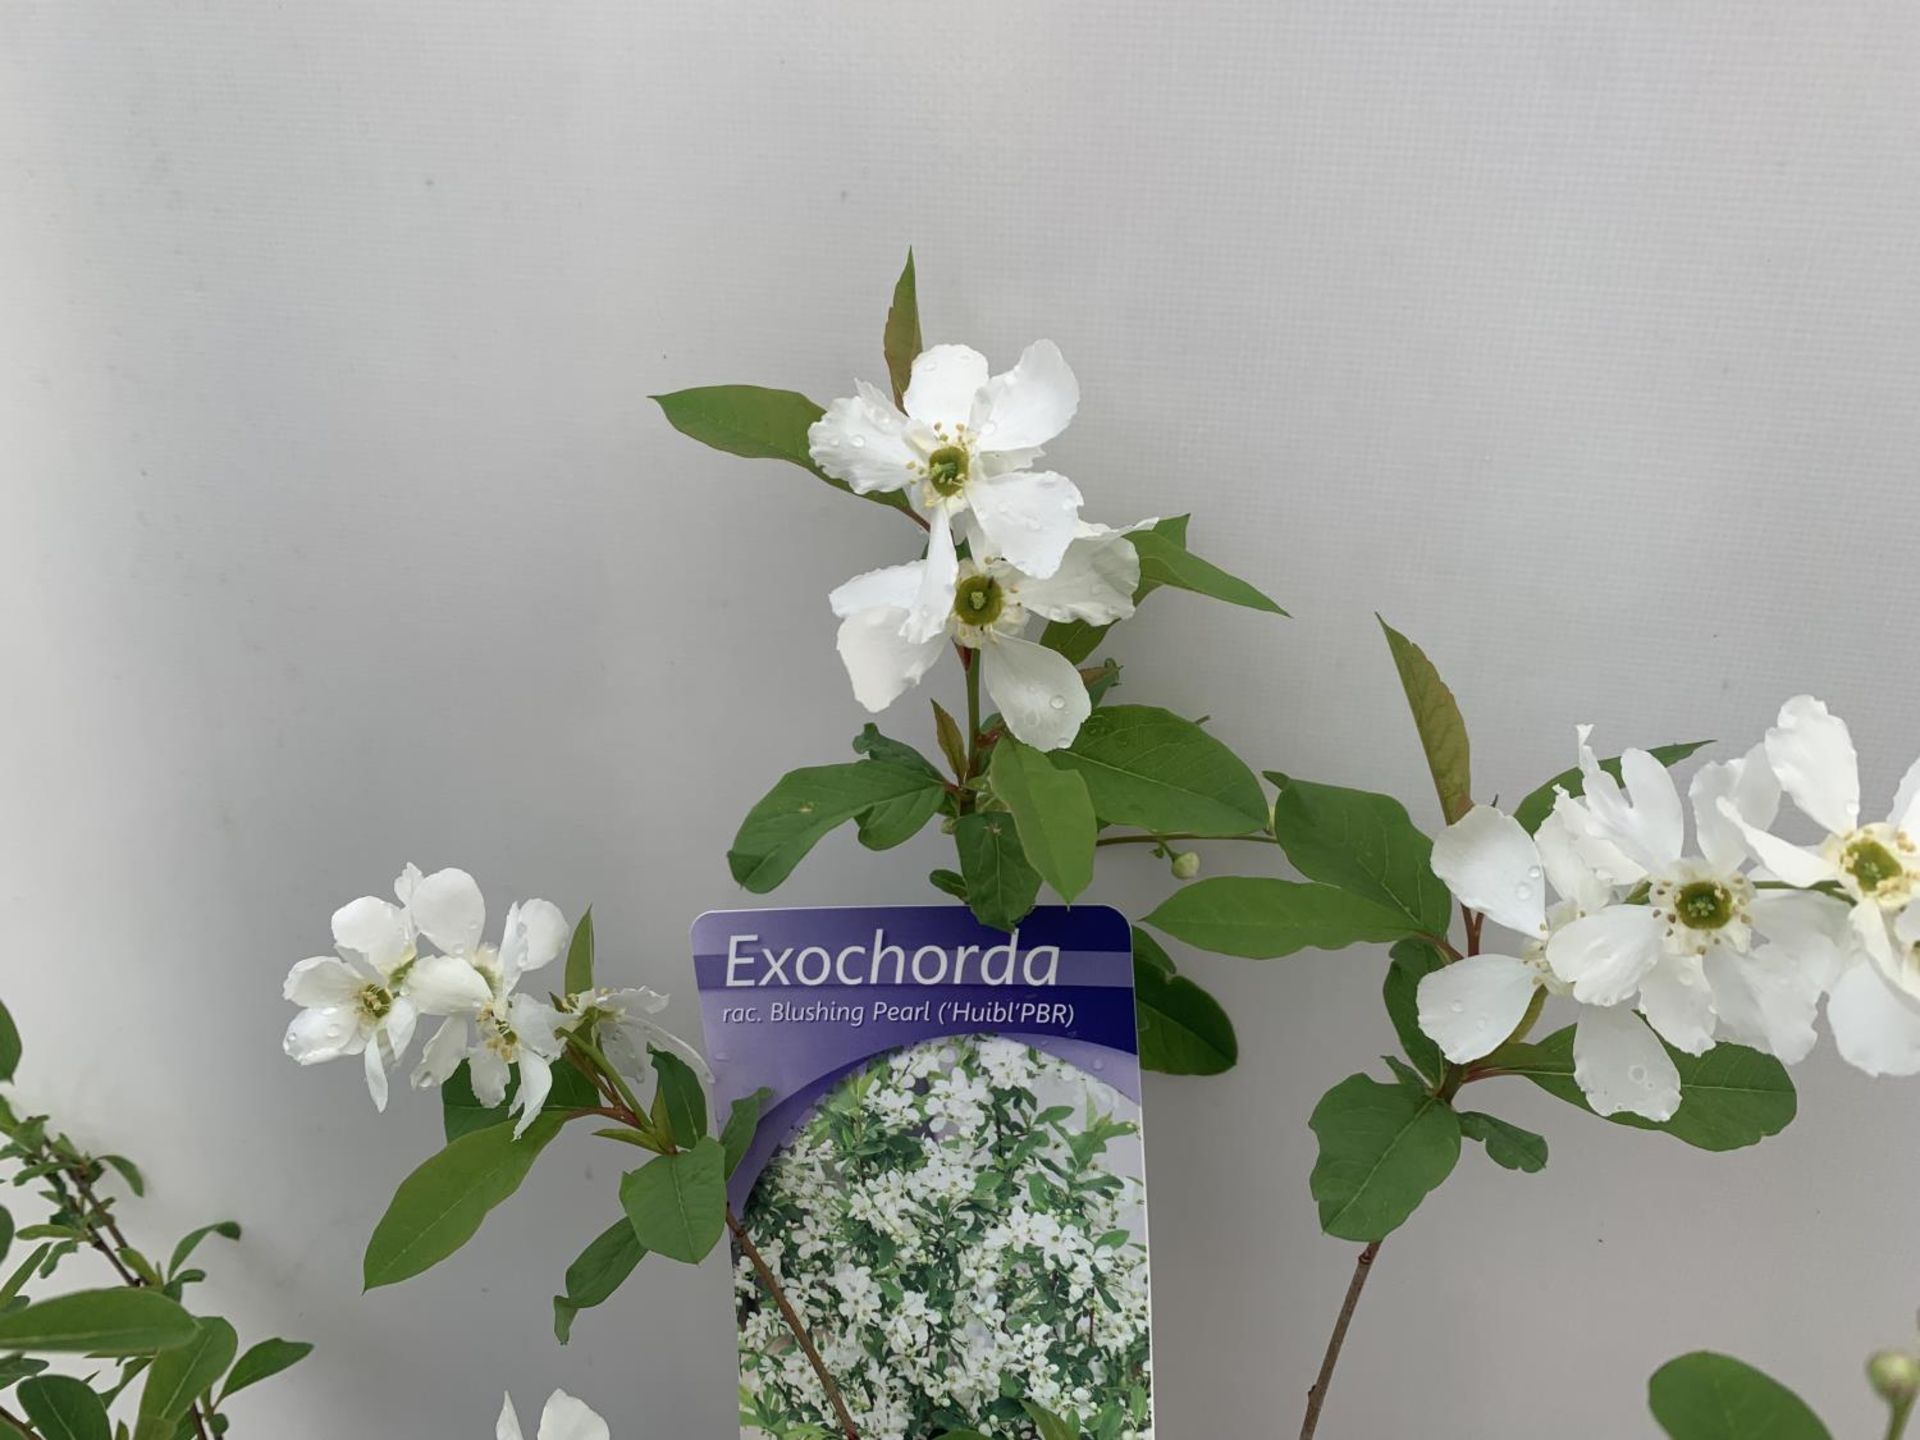 TWO EXOCHORDA 'NIAGARA' AND 'BLUSHING PEARL' APPROX 60CM IN HEIGHT IN 2 LTR POTS PLUS VAT TO BE SOLD - Bild 4 aus 6